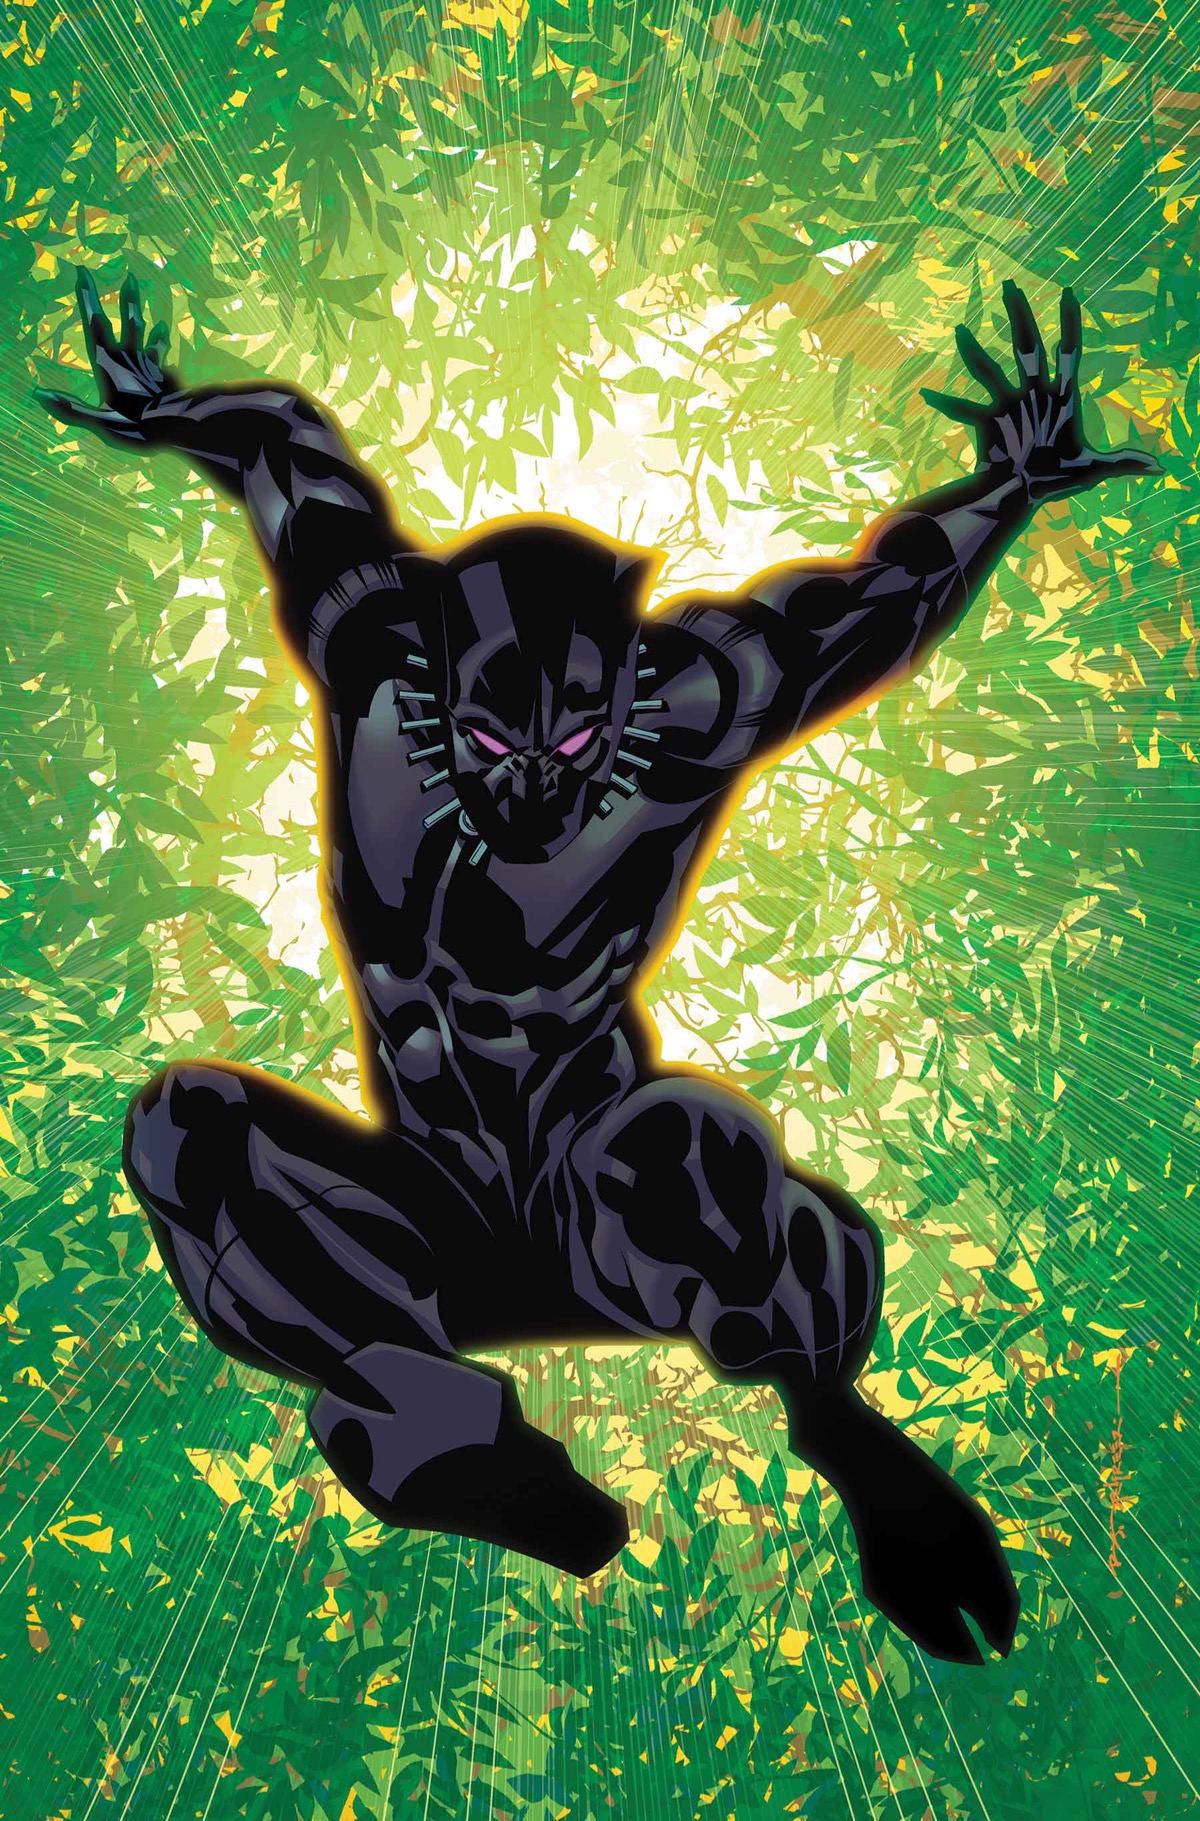 BLACK PANTHER ANNUAL #1 VARIANT